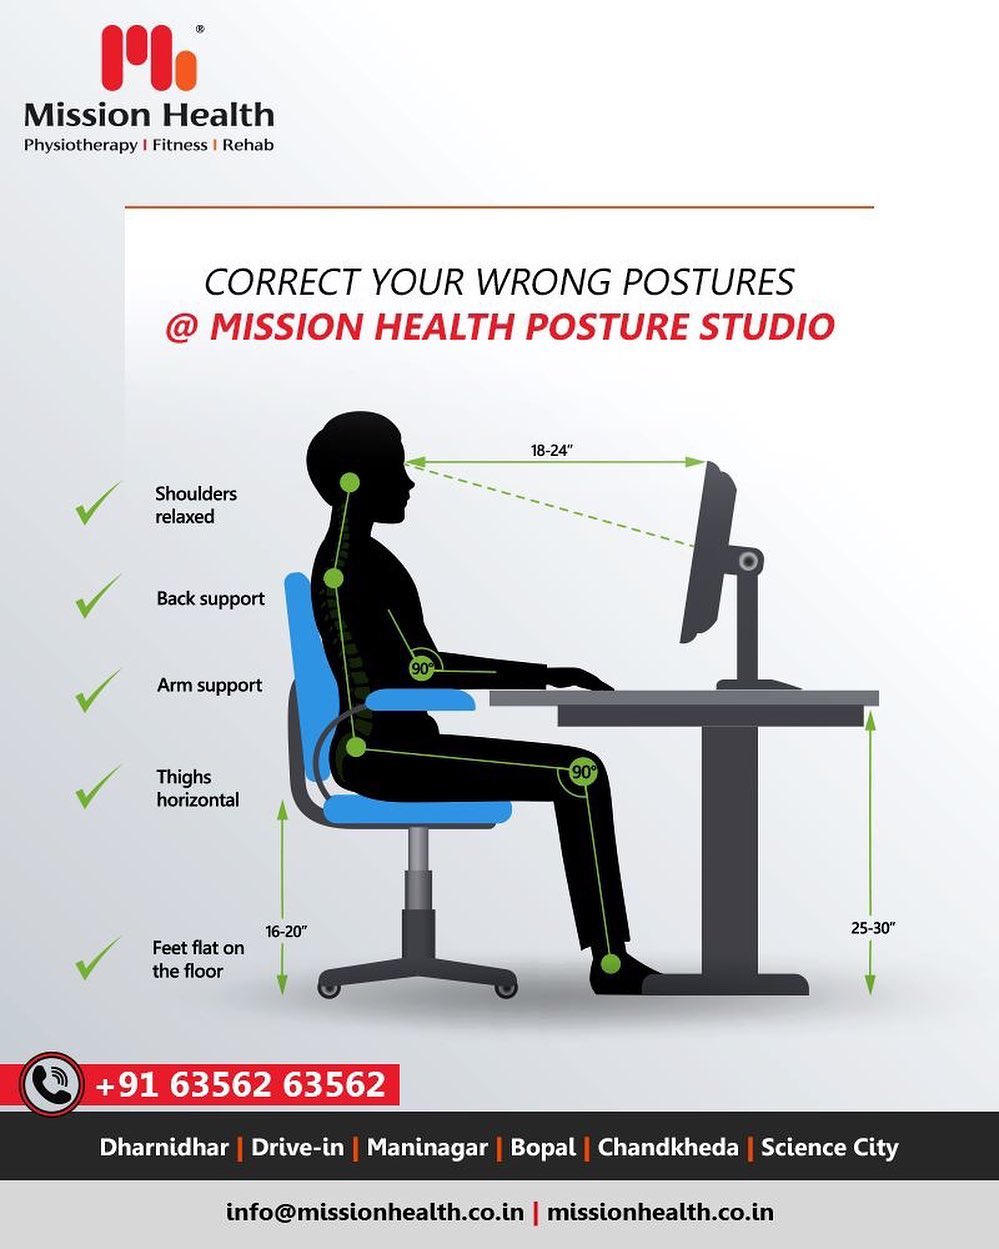 At the Mission Health Posture Studio, our expert physiotherapists identify the problem and provide a suitable solution accordingly. Re-learning a new sequence of skills, co-ordination & correct postural alignment often requires un-learning of previously established bad habits and retraining the neuromotor control to retain the new posture.

#MissionHealth #MissionHealthIndia #AbilityClinic #MovementIsLife